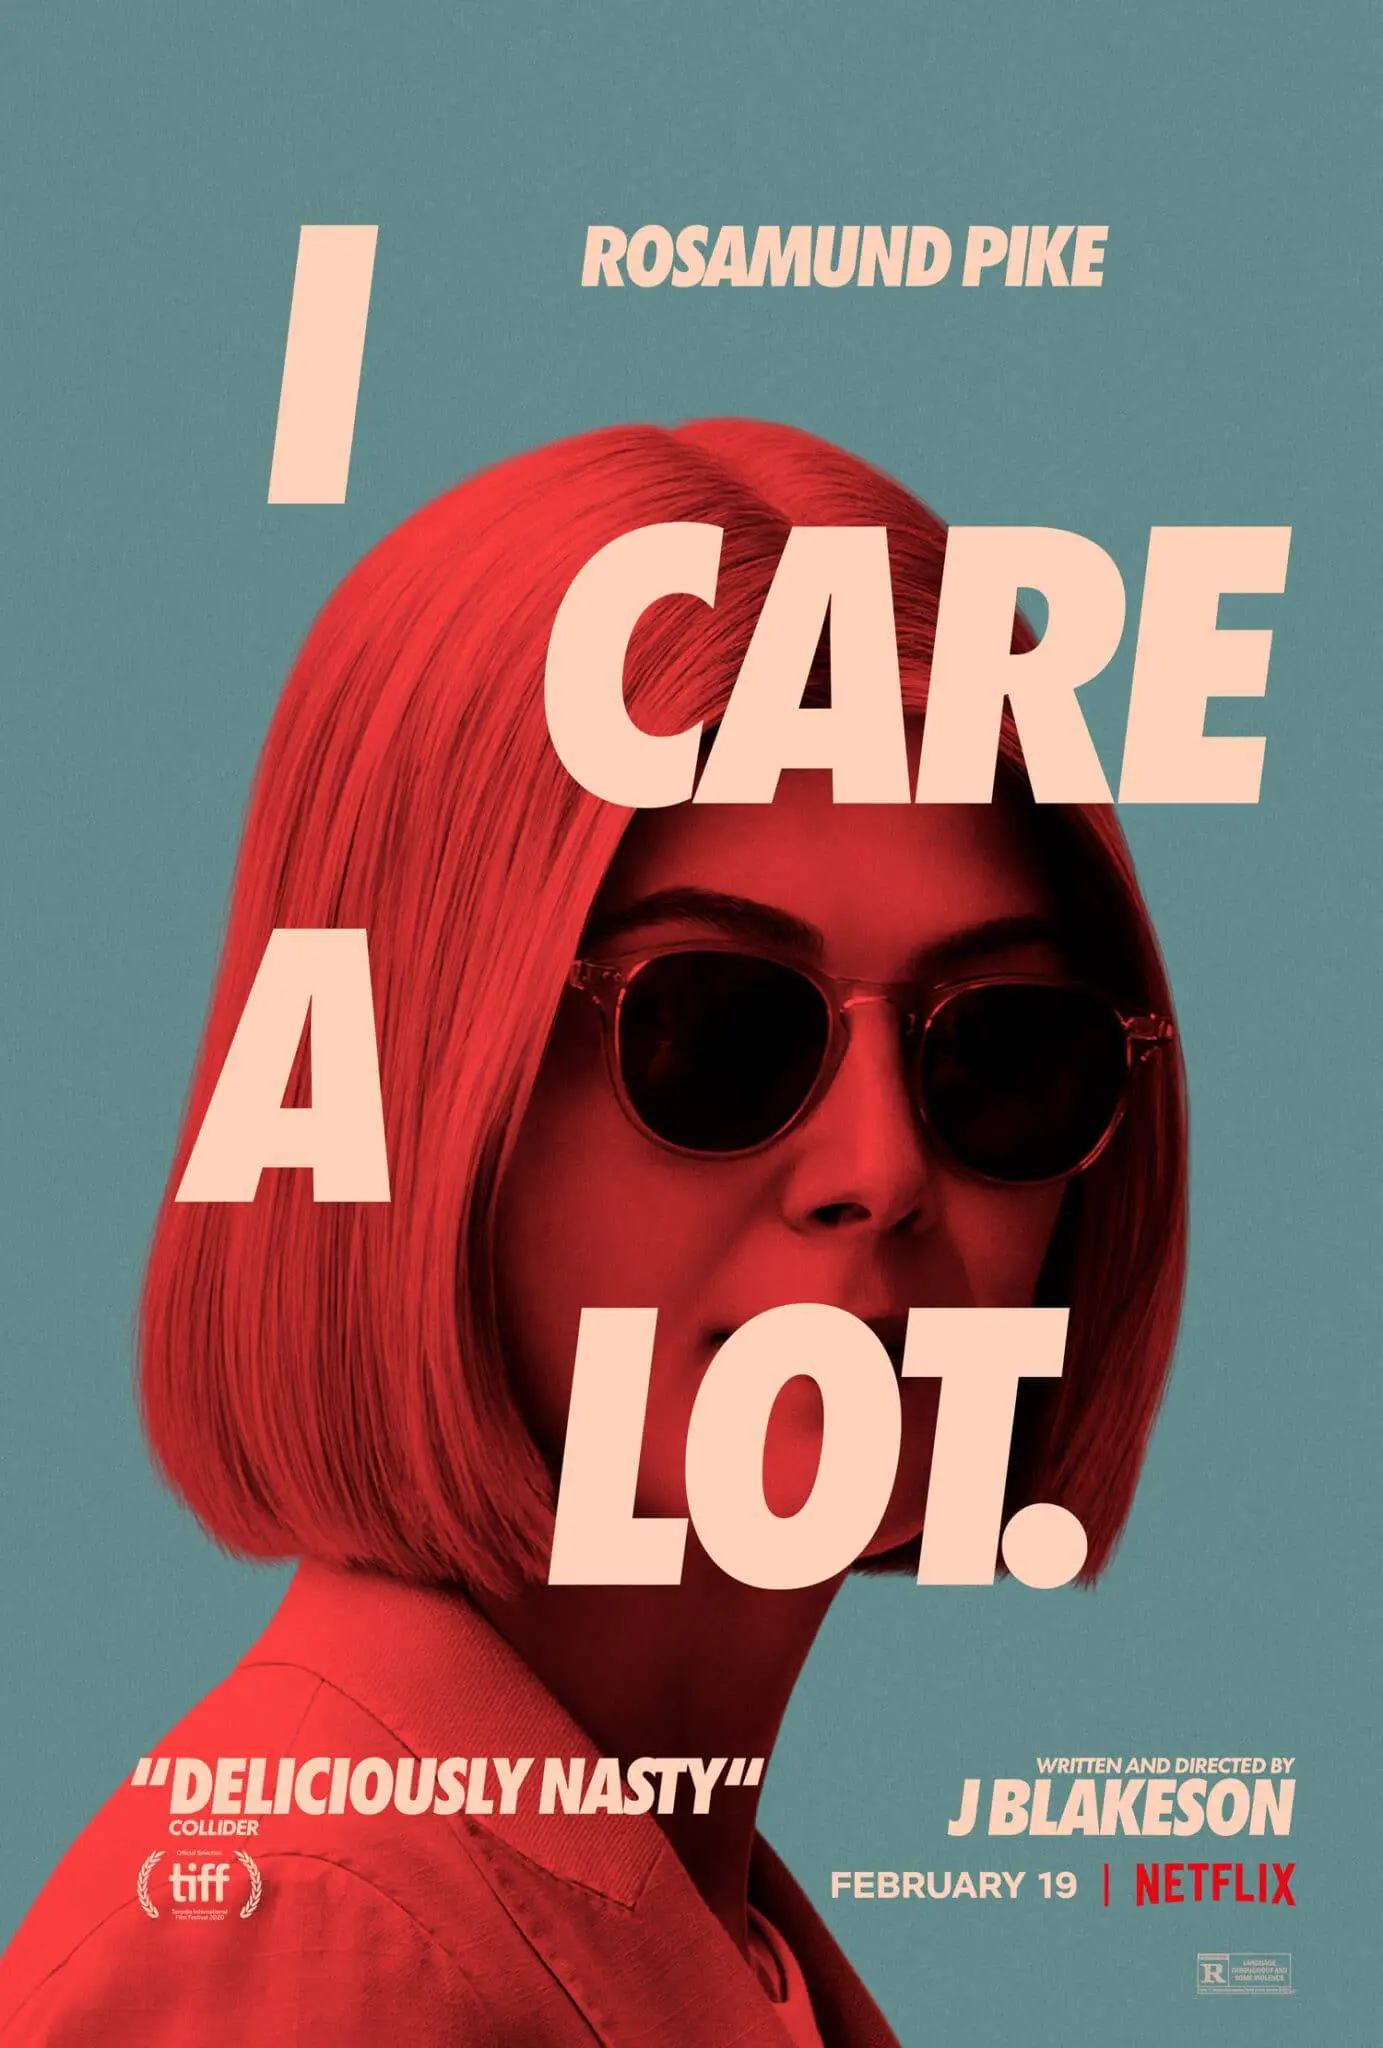 ‘I Care a lot’ highlights raw power play in a gender reversal dark and delightful comedy